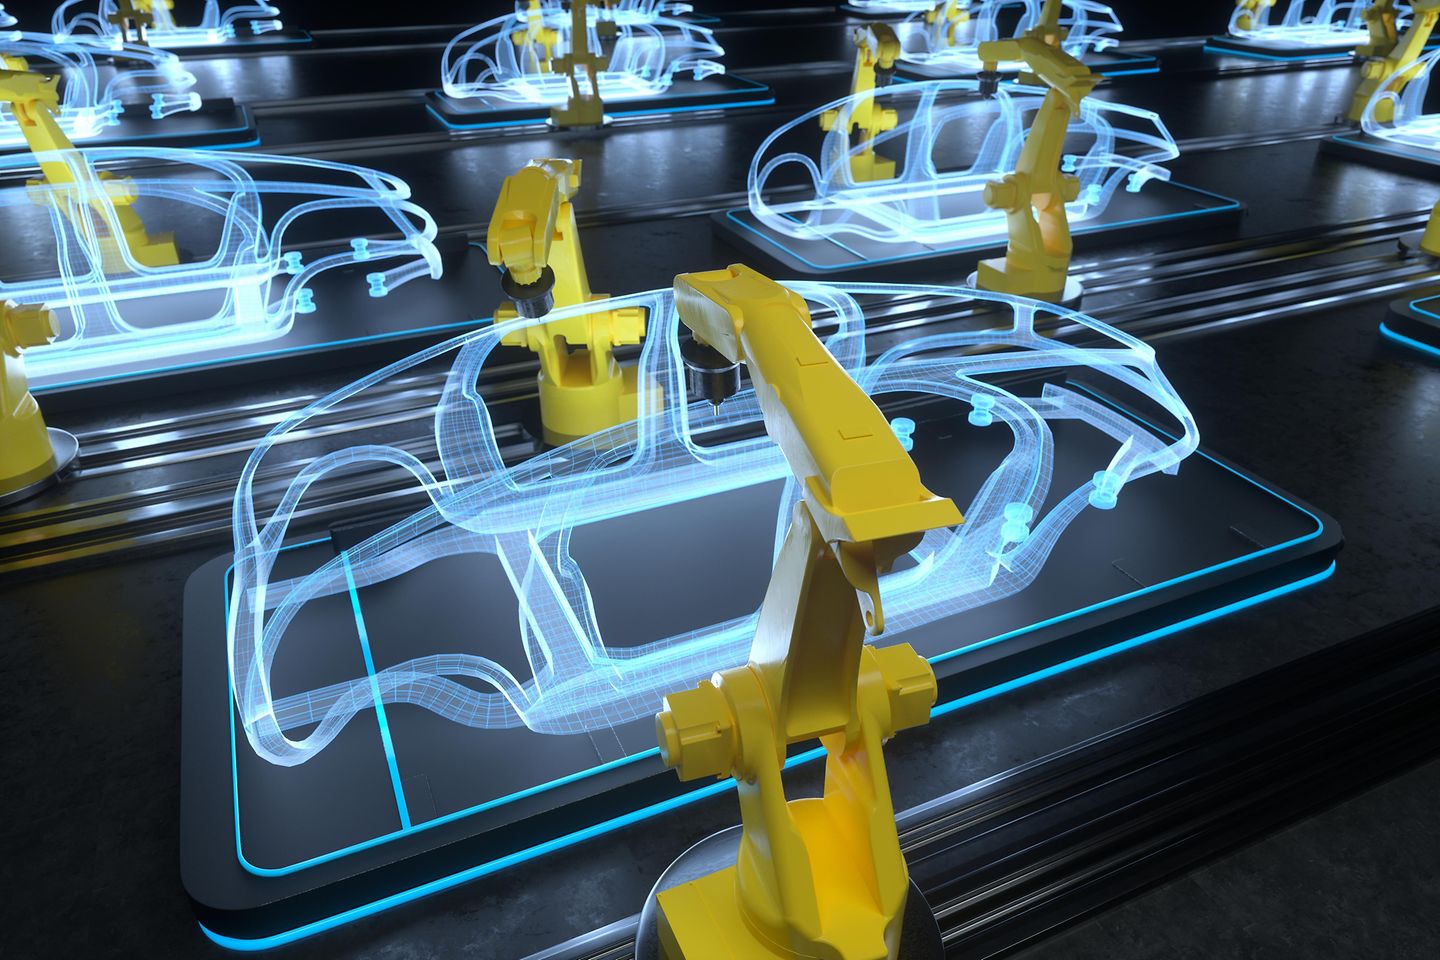 Robotic arms working on car production line